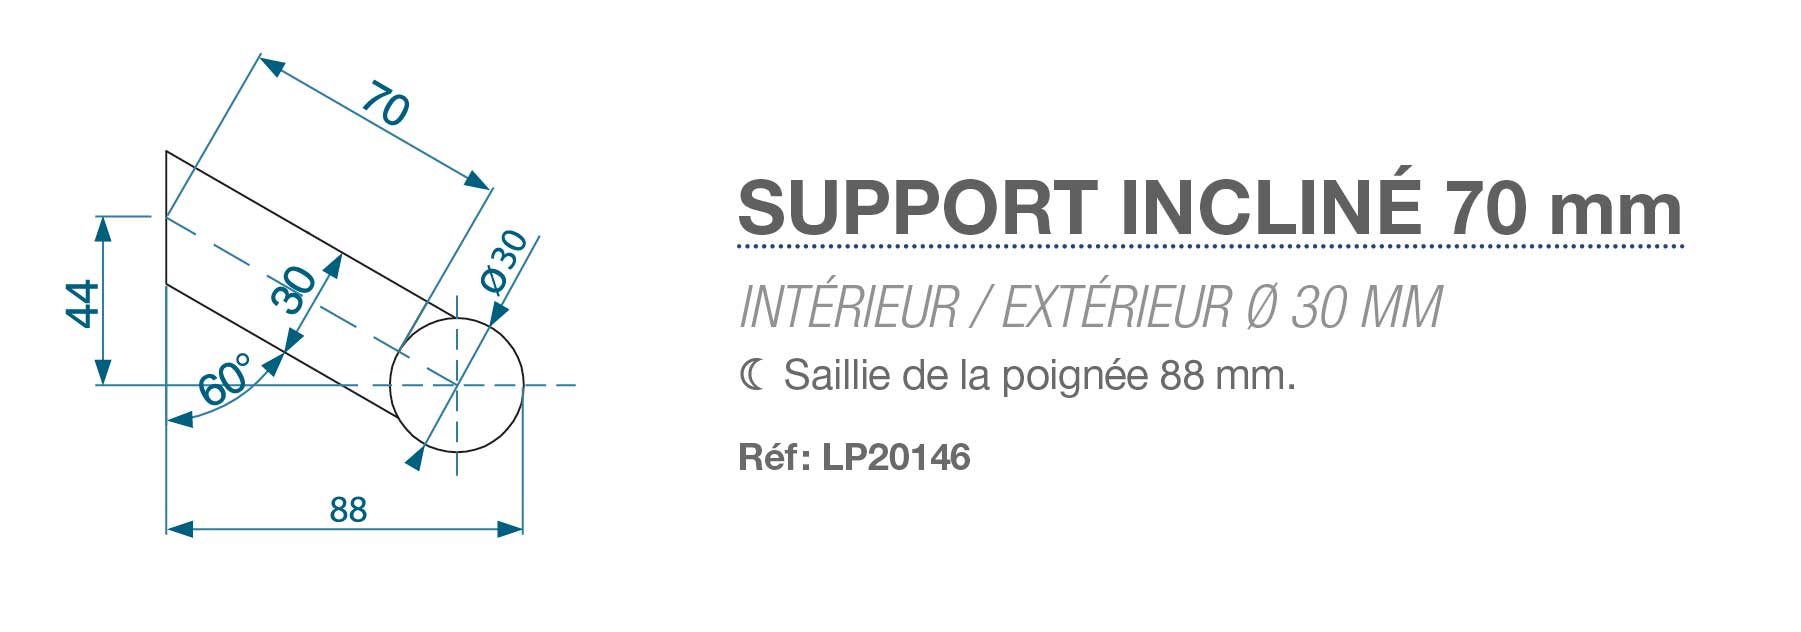 Support-incliné-70-mm_Diam30